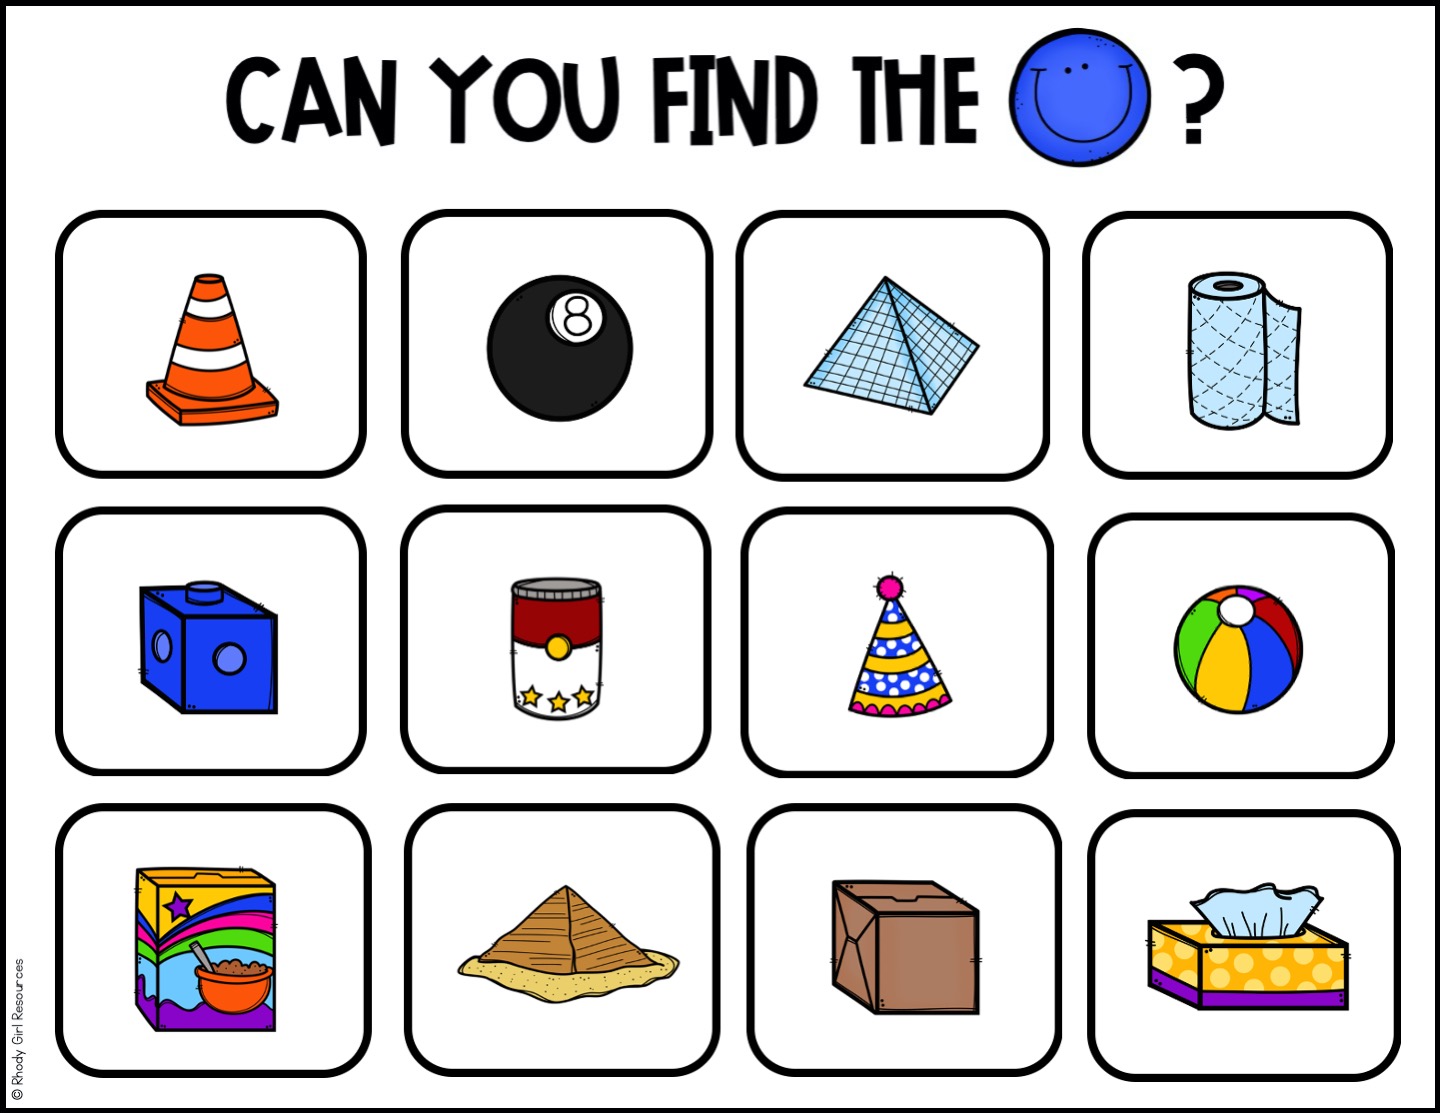 Shapes Hide and Seek Game by The Tahoe Teacher